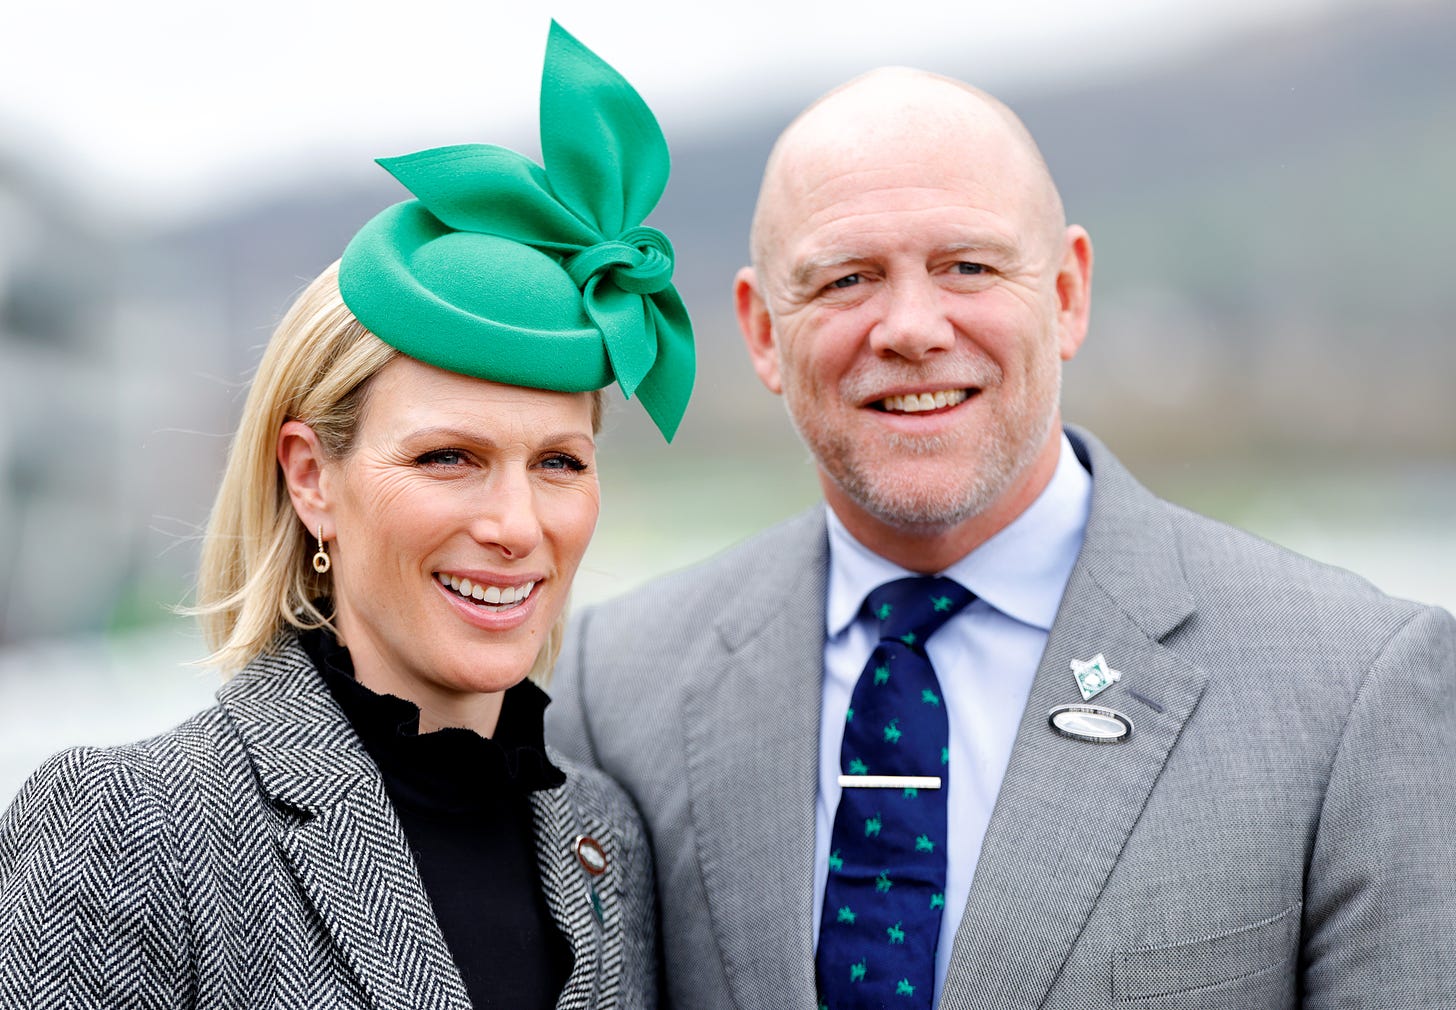 Mike and Zara Tindall at the races